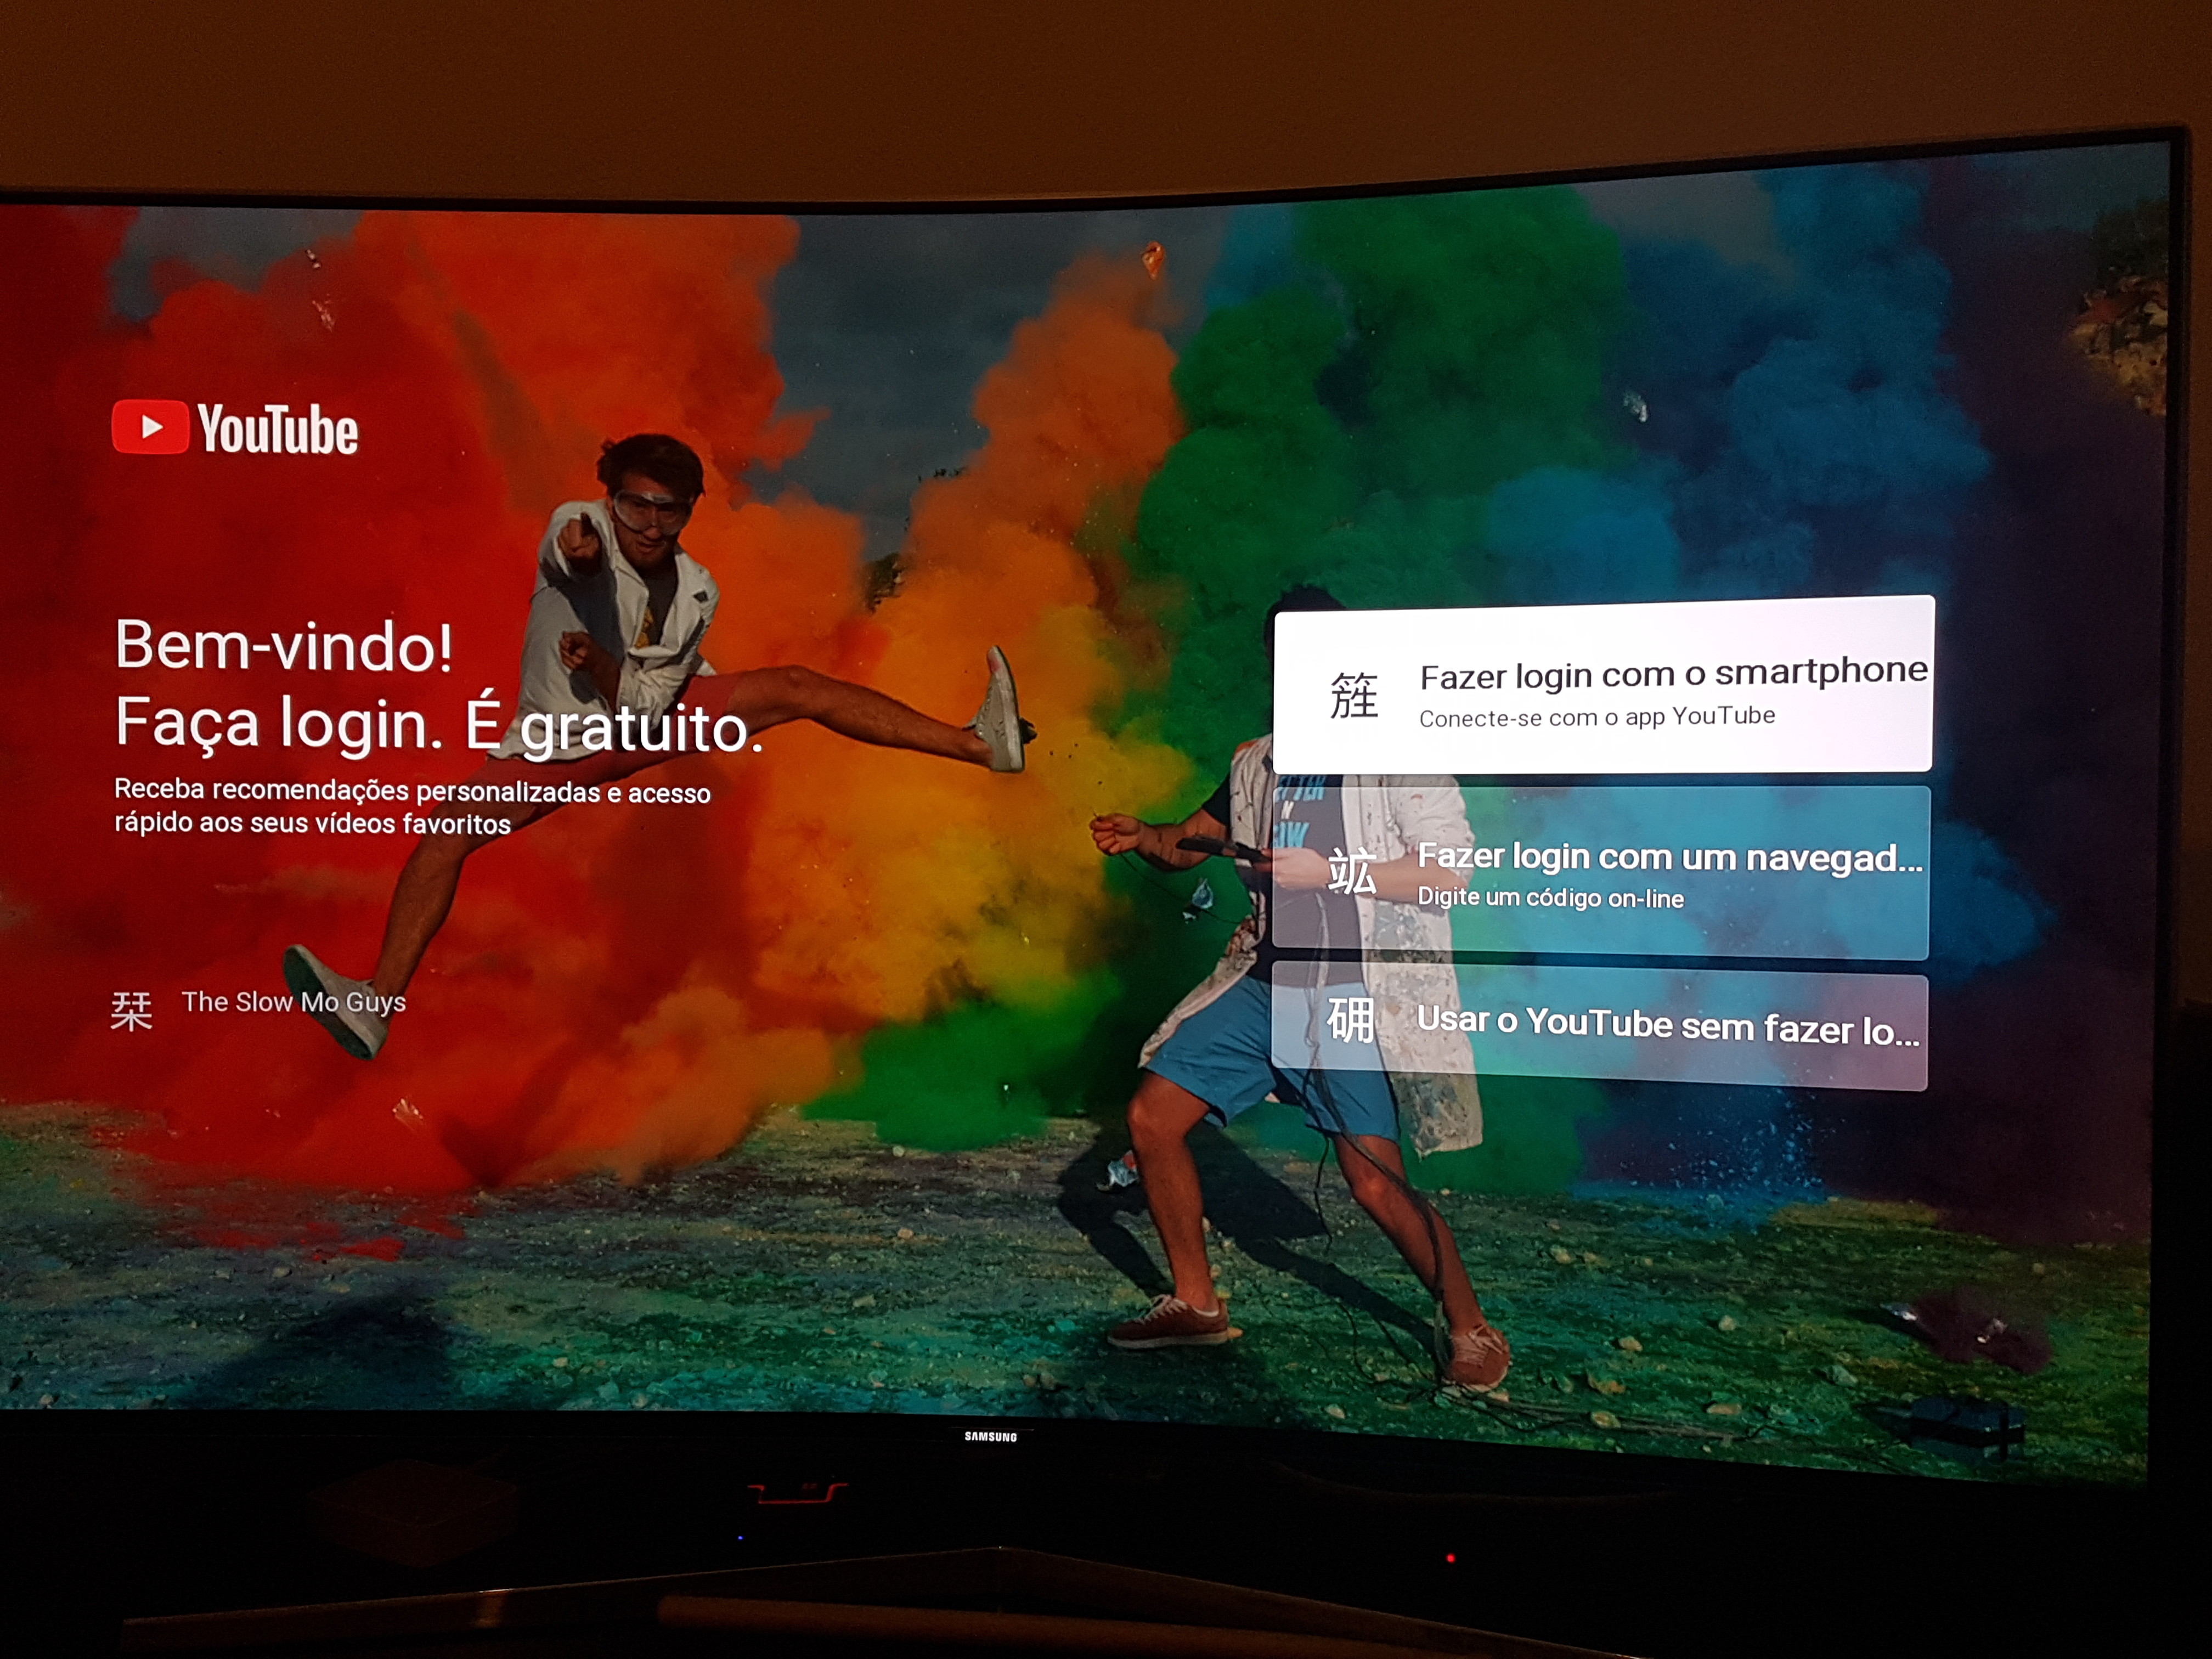 My Samsung Smart Tv App Is Showing Weird Characters Instead Of Icons On The Youtube App - Youtube Community